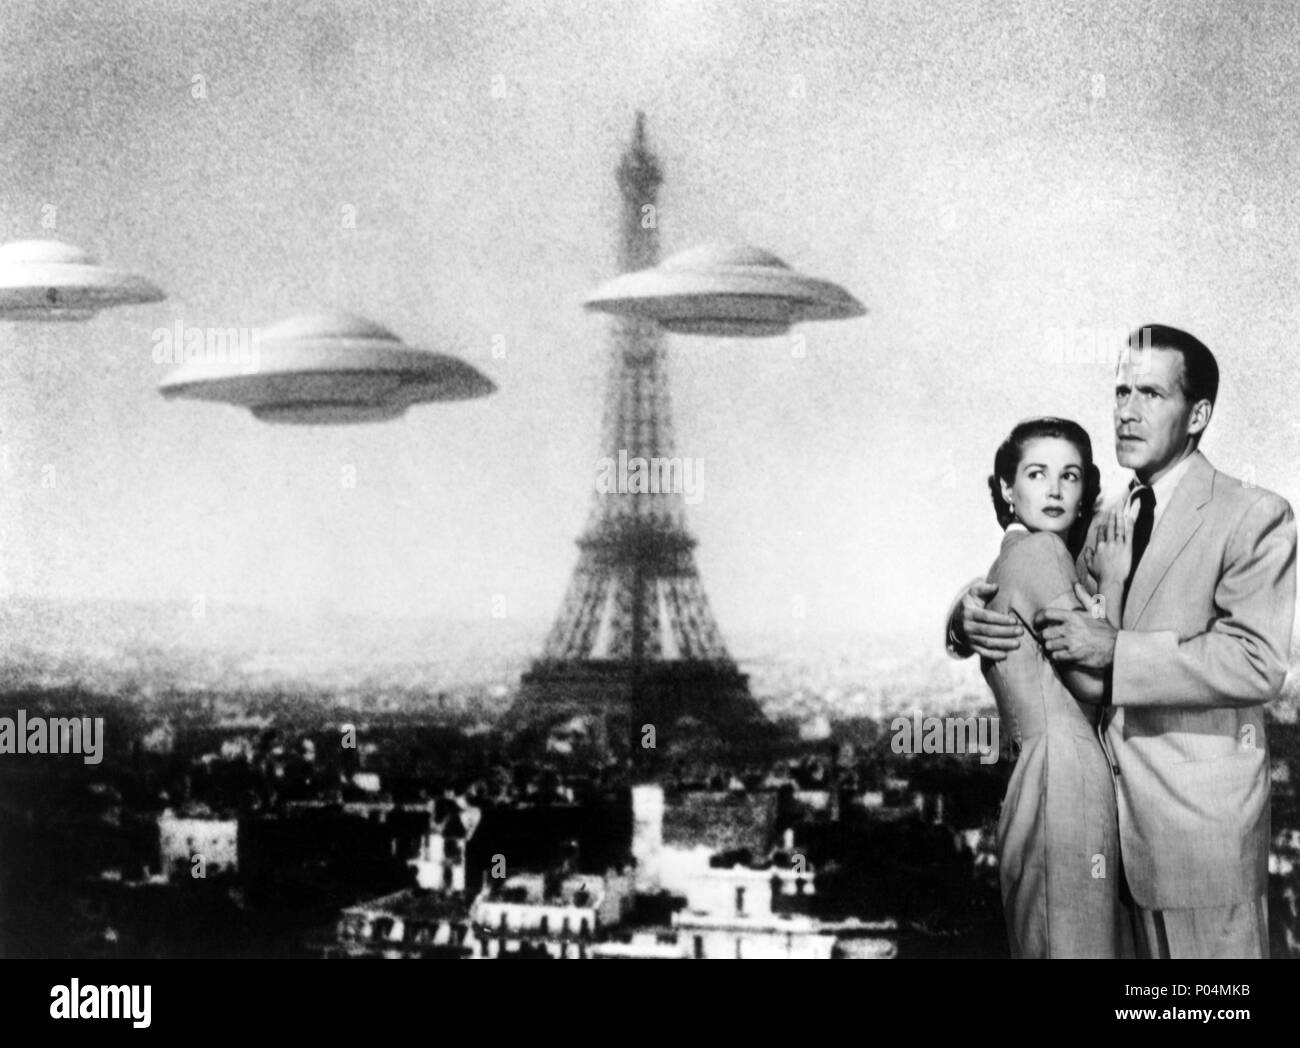 Original Film Title: EARTH VS THE FLYING SAUCERS.  English Title: EARTH VS THE FLYING SAUCERS.  Film Director: FRED F. SEARS.  Year: 1956.  Stars: HUGH MARLOWE. Credit: COLUMBIA PICTURES / Album Stock Photo